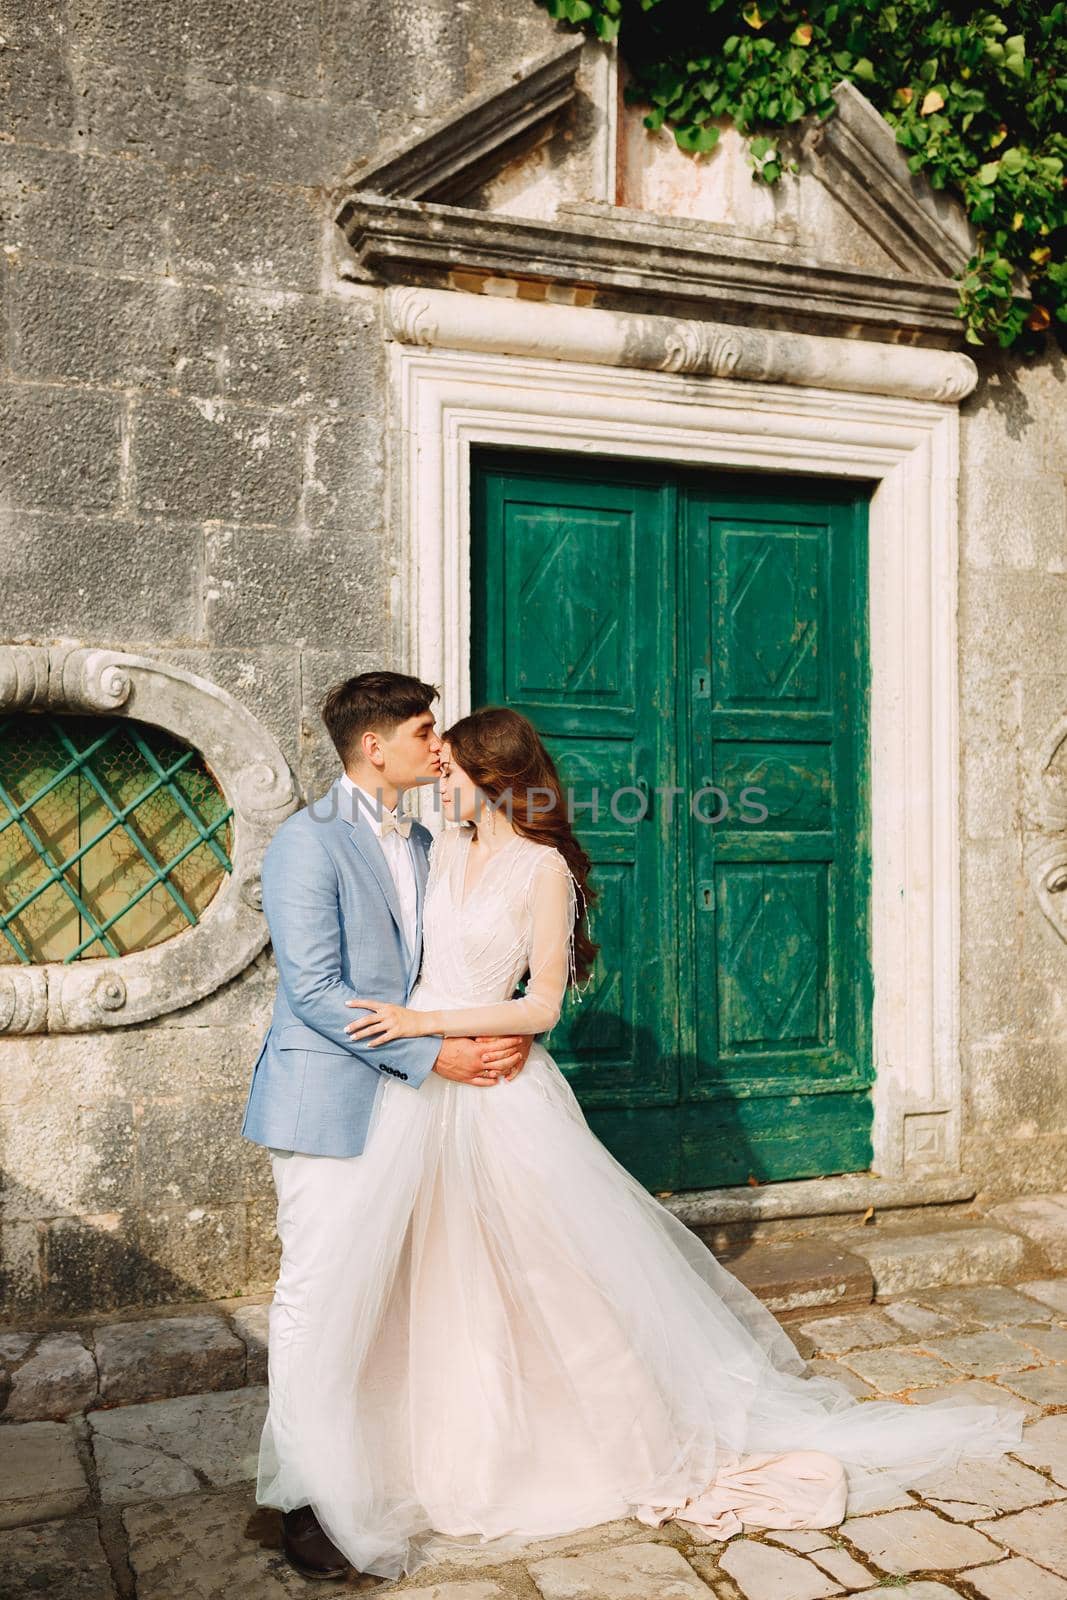 The bride and groom are embracing at the wooden door of an ancient building in Perast, the groom kisses the bride on the forehead by Nadtochiy